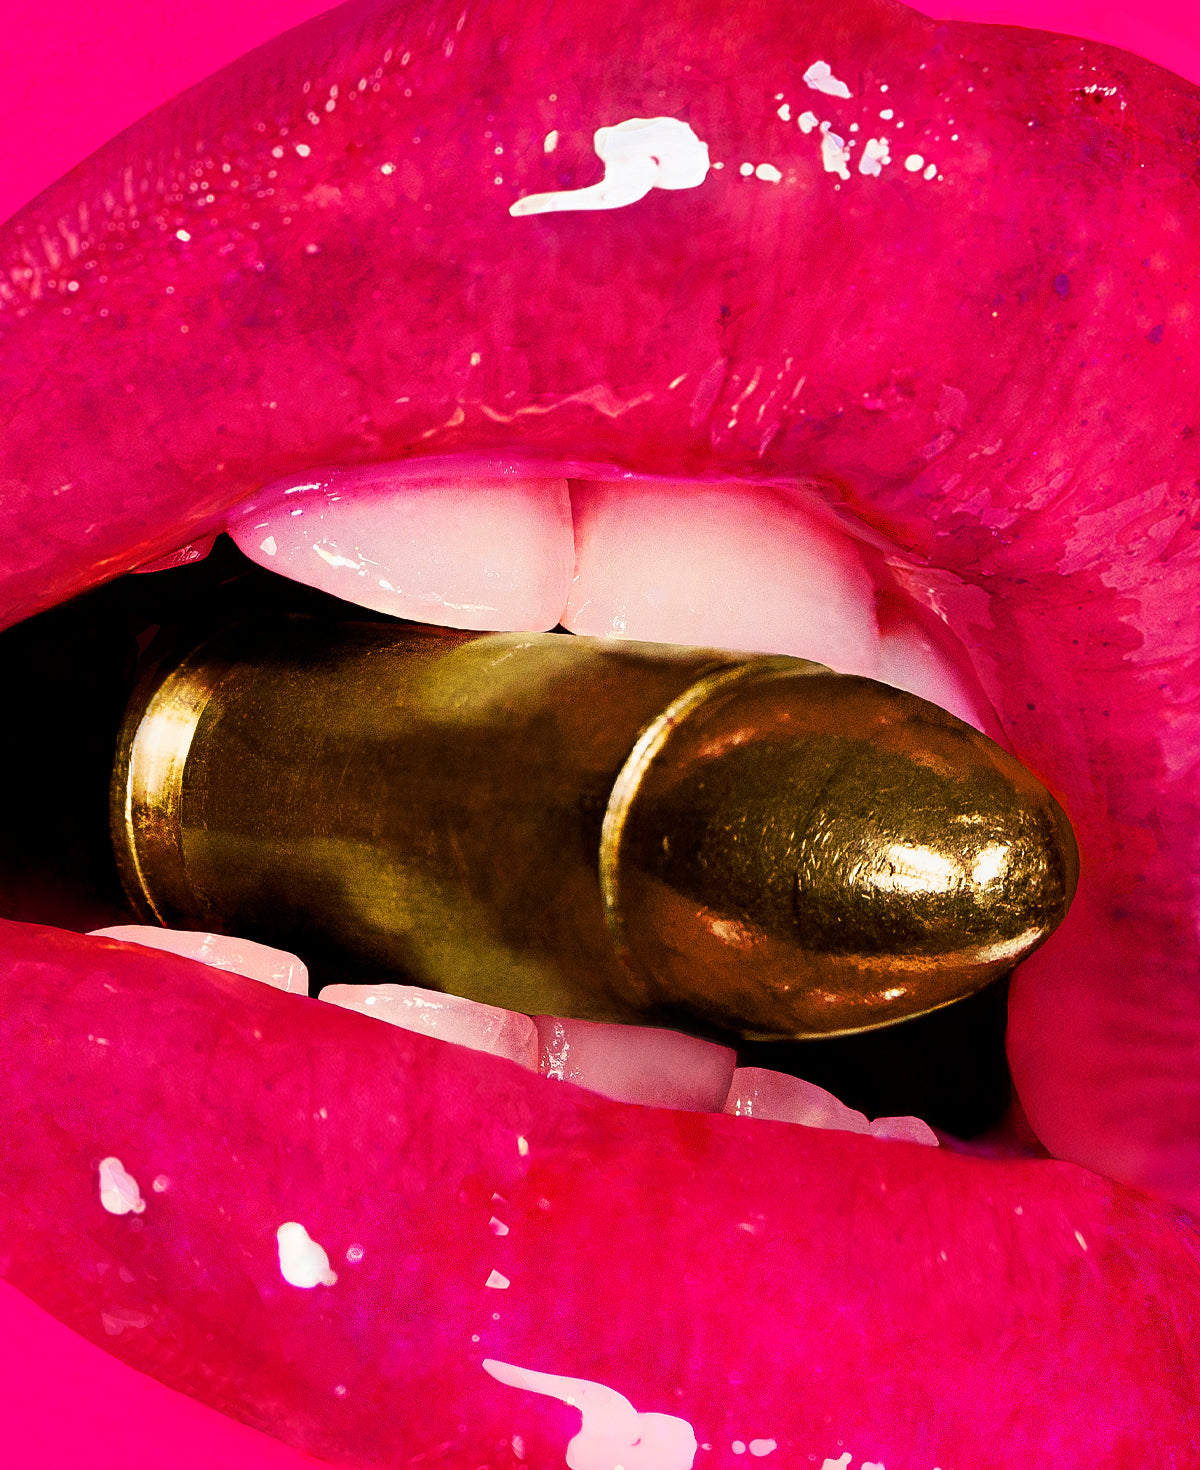 BULLETPROOF (PINK) / POP ART / Limited Editions from €200,- Worldwide shipping 